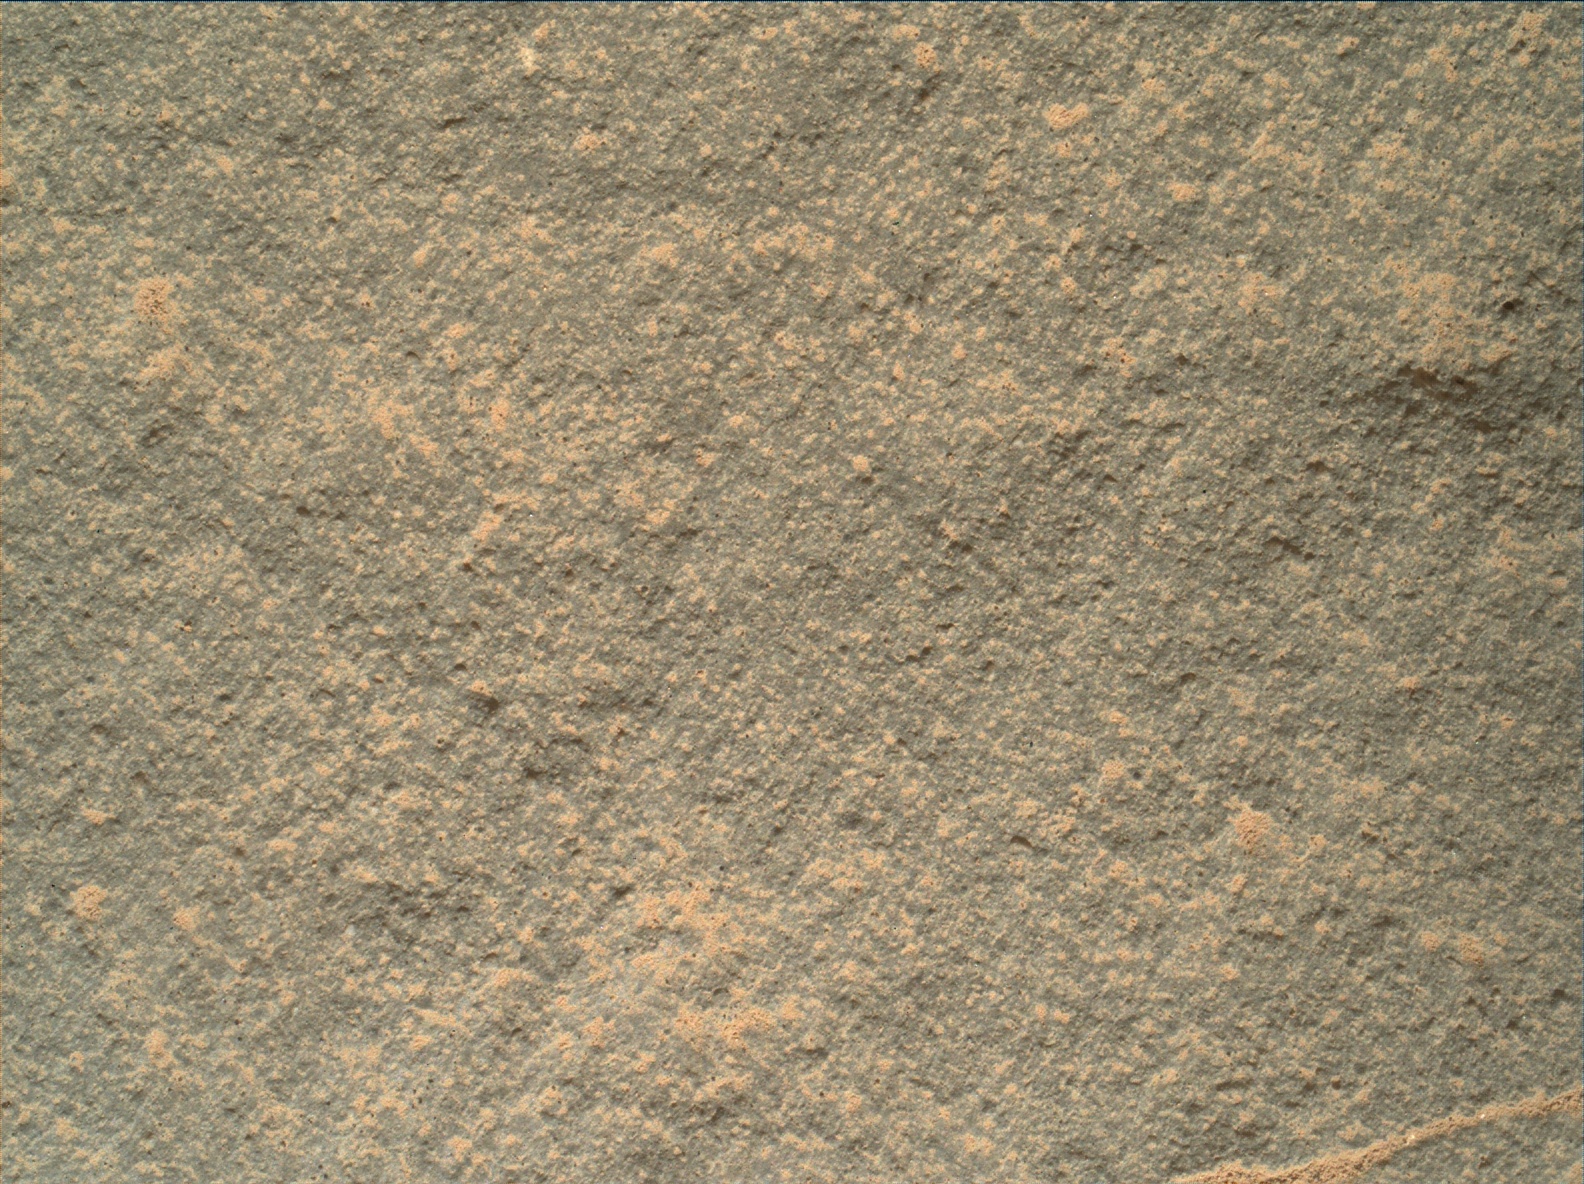 Nasa's Mars rover Curiosity acquired this image using its Mars Hand Lens Imager (MAHLI) on Sol 156